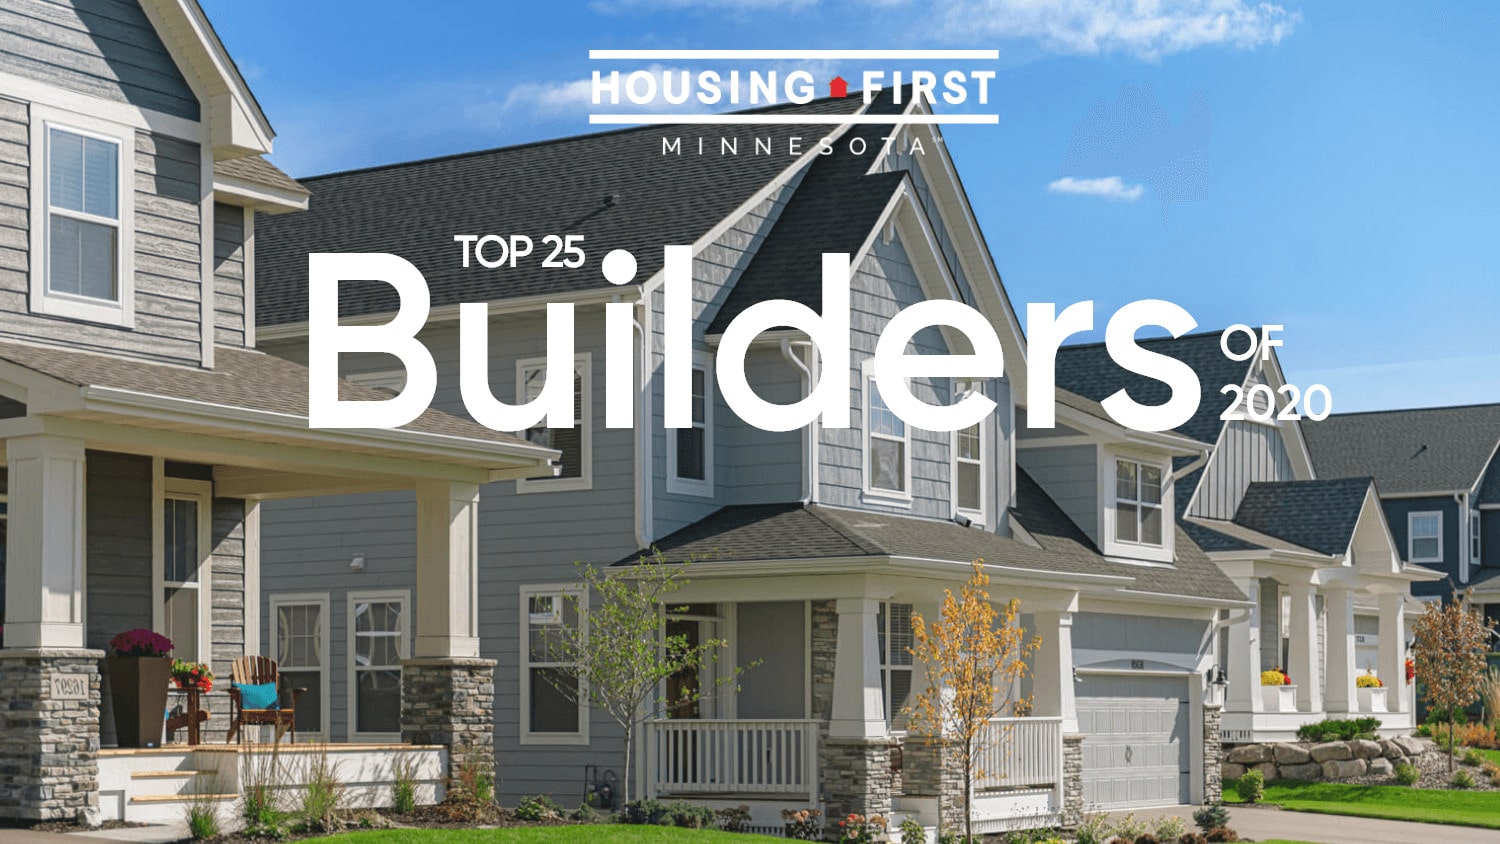 Housing First Minnesota Top 25 Builders of 2020 role="img"